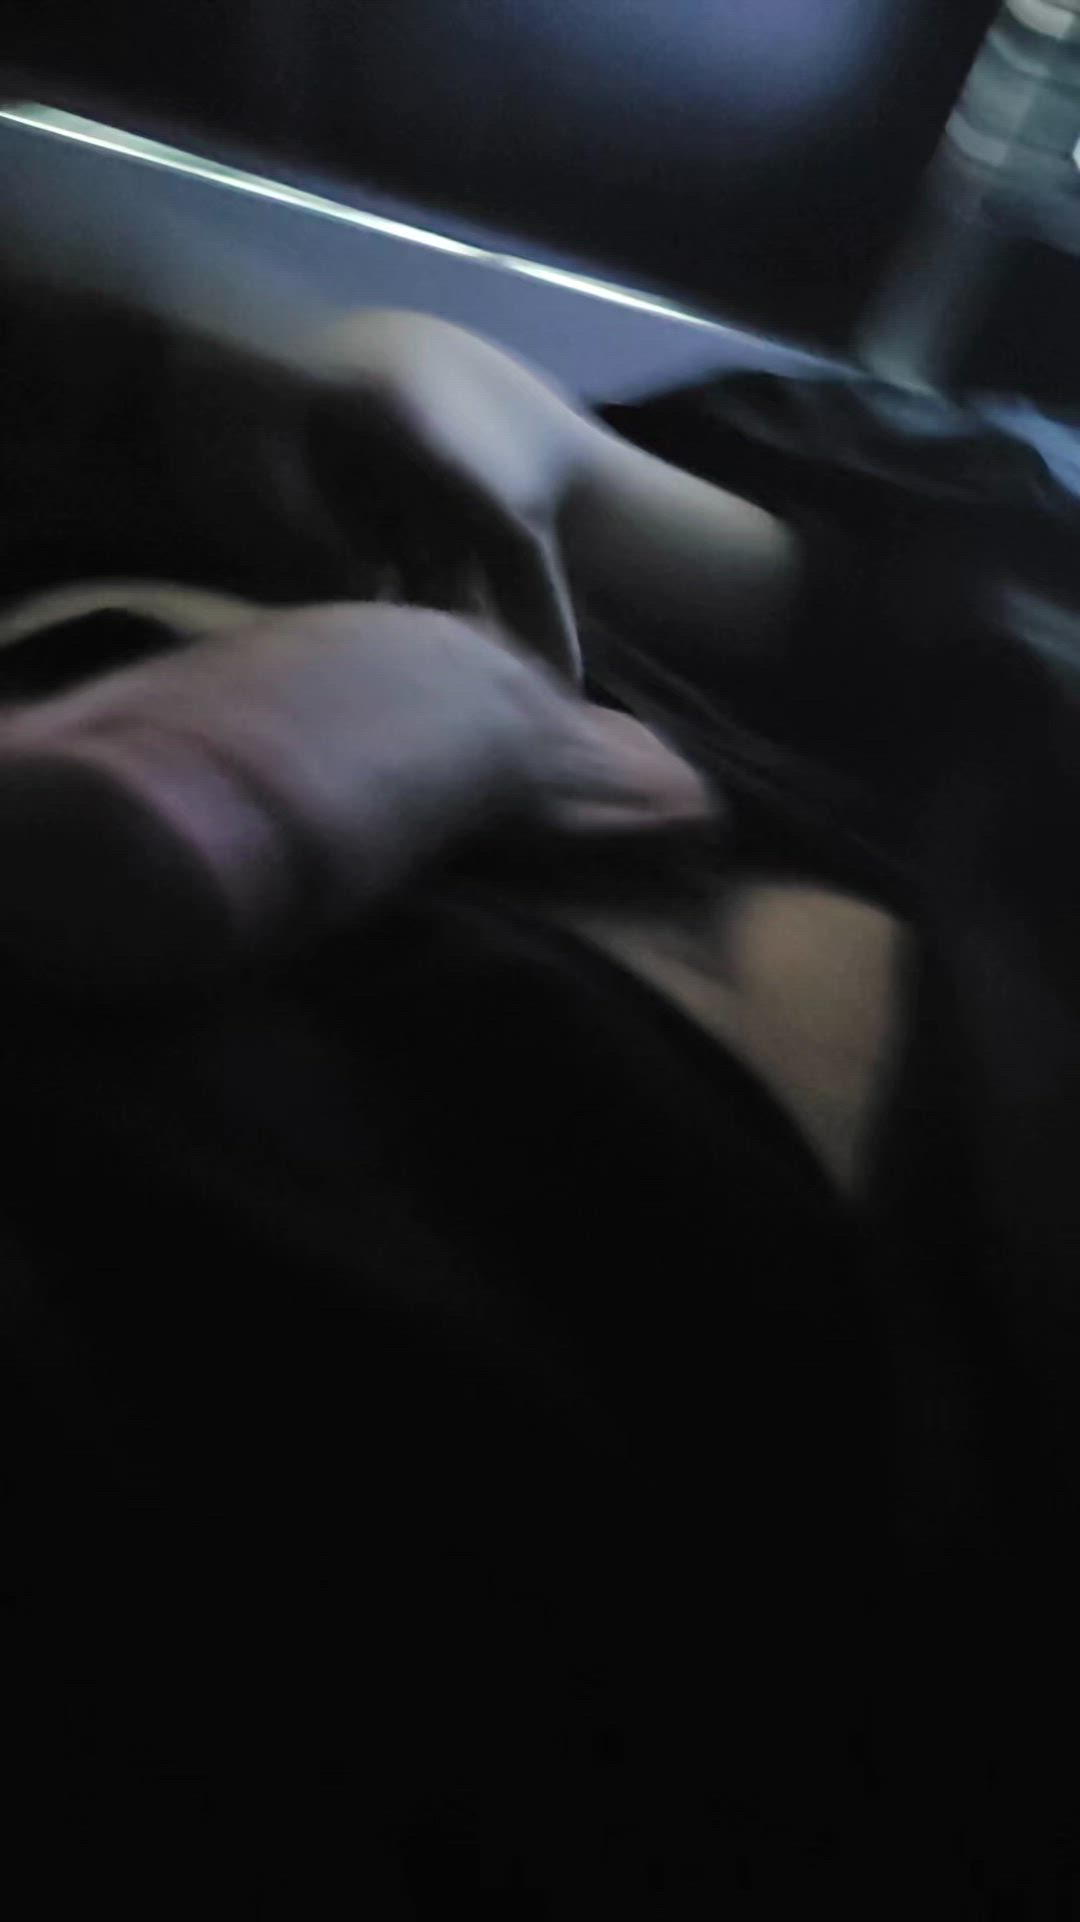 Amateur porn video with onlyfans model frtwnty <strong>@canadianxguy</strong>